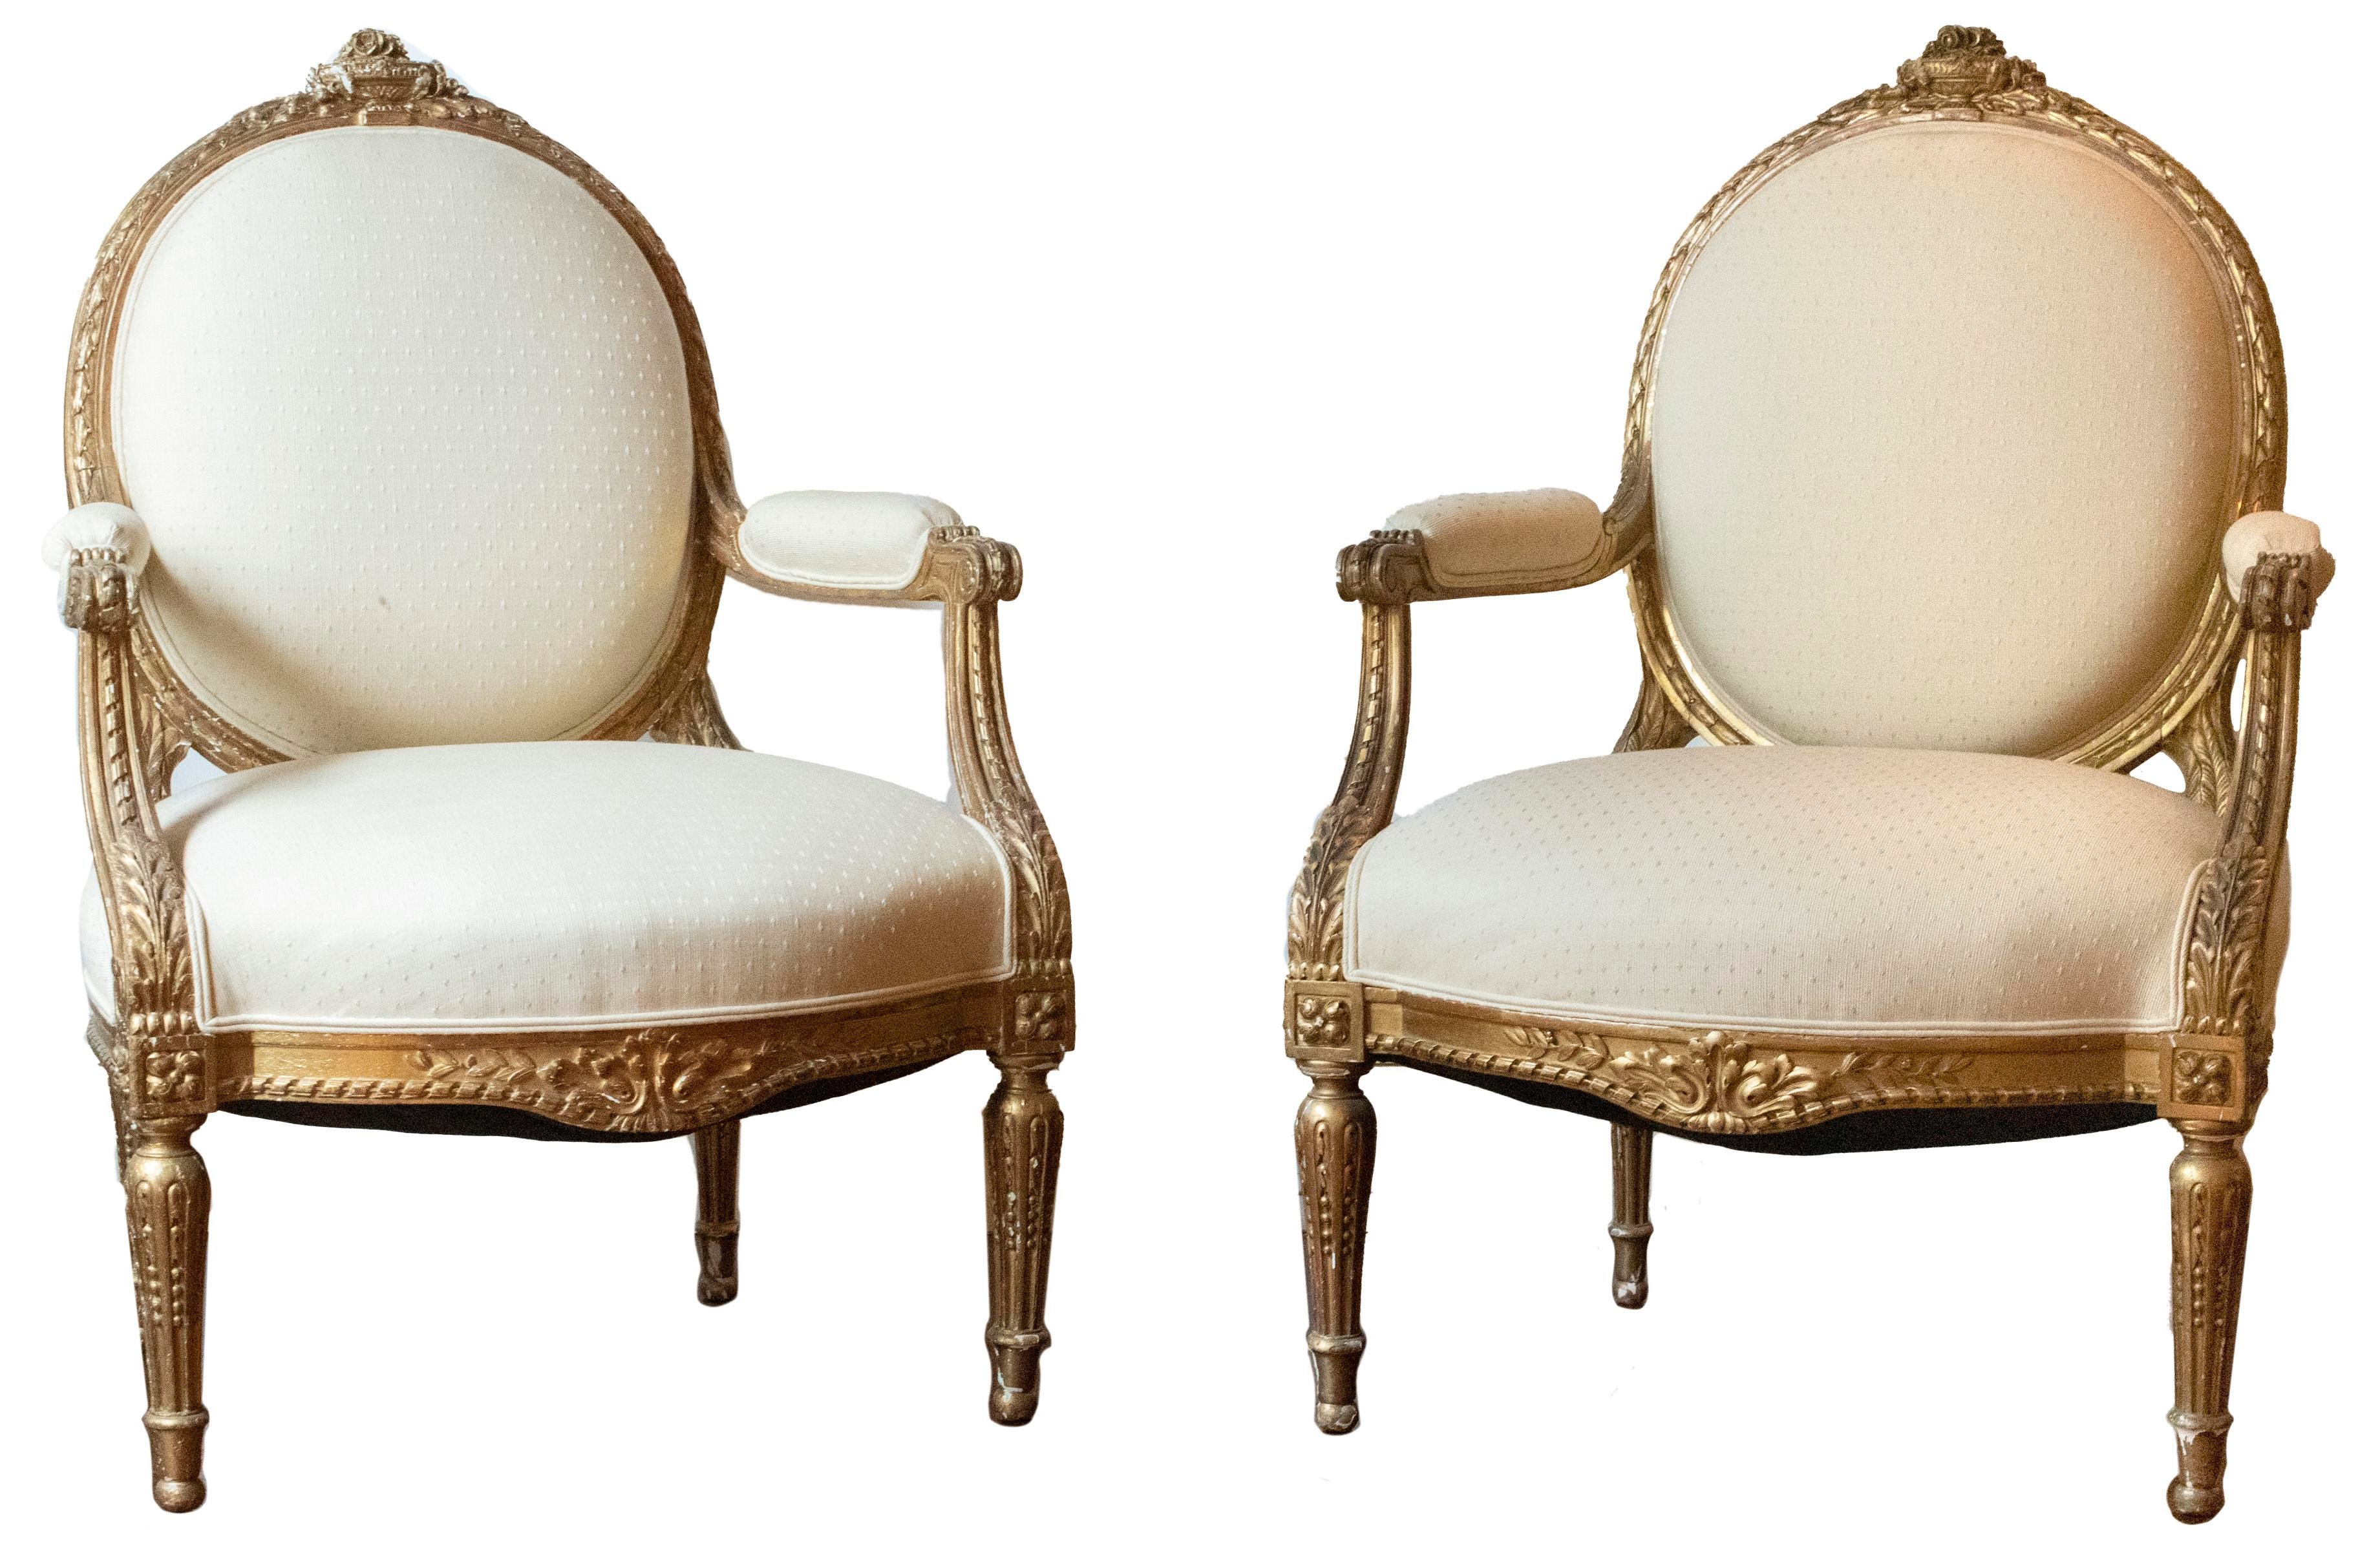 FRENCH LOUIS XVI STYLE GILTWOOD 2d254f